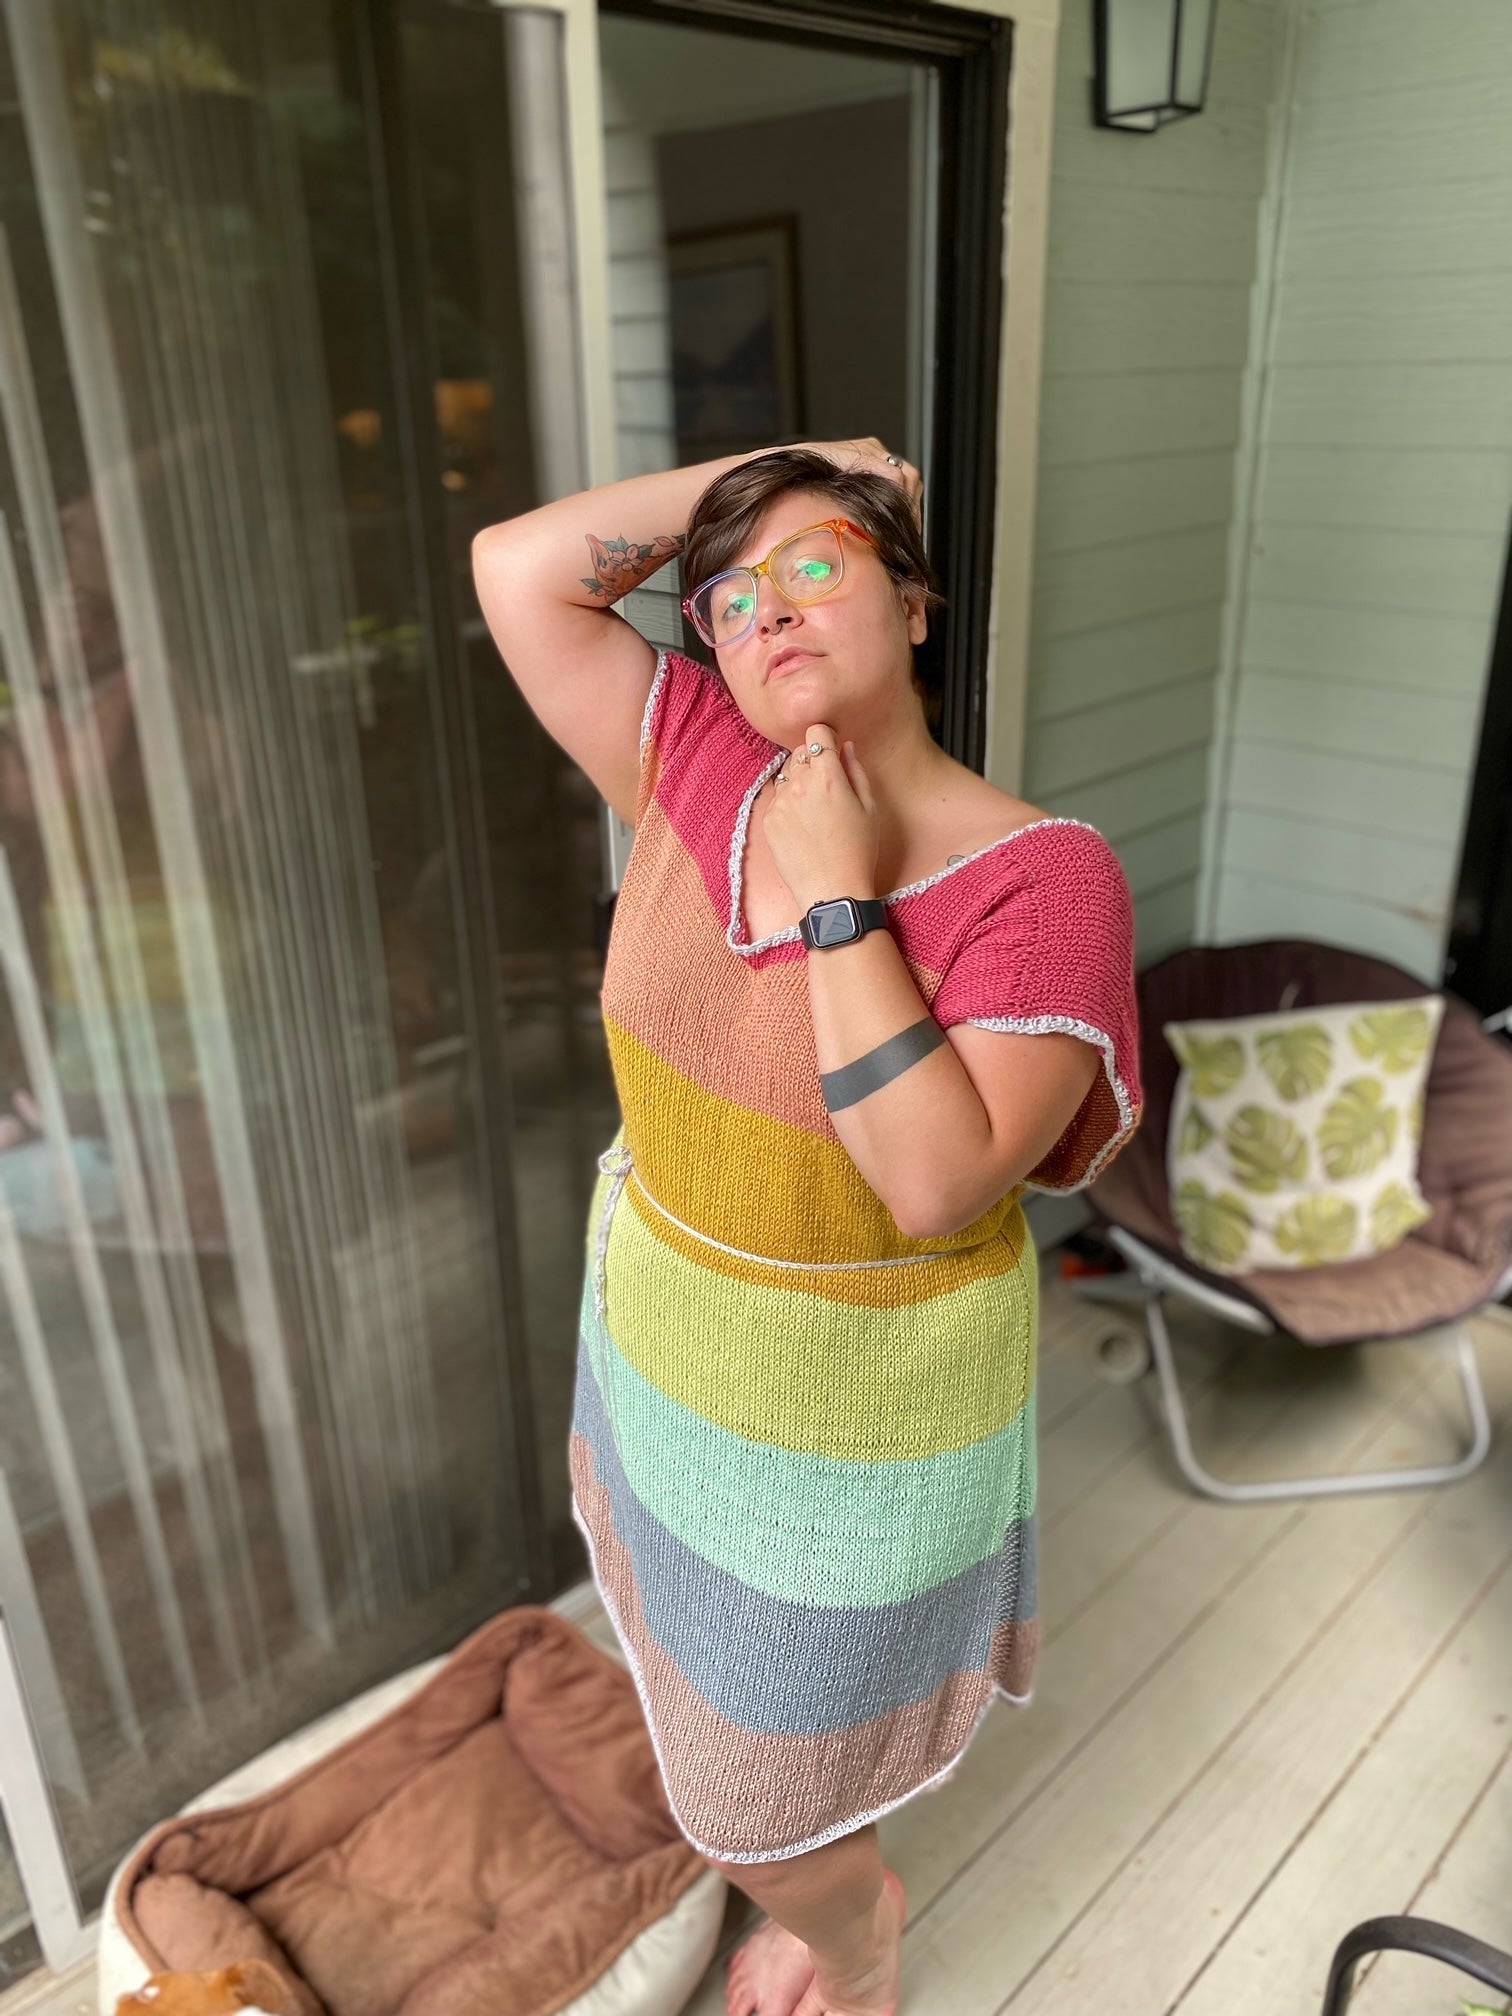 A person stands on their porch, smiling at the camera. Her hand knit dress is knit in rainbow sections.